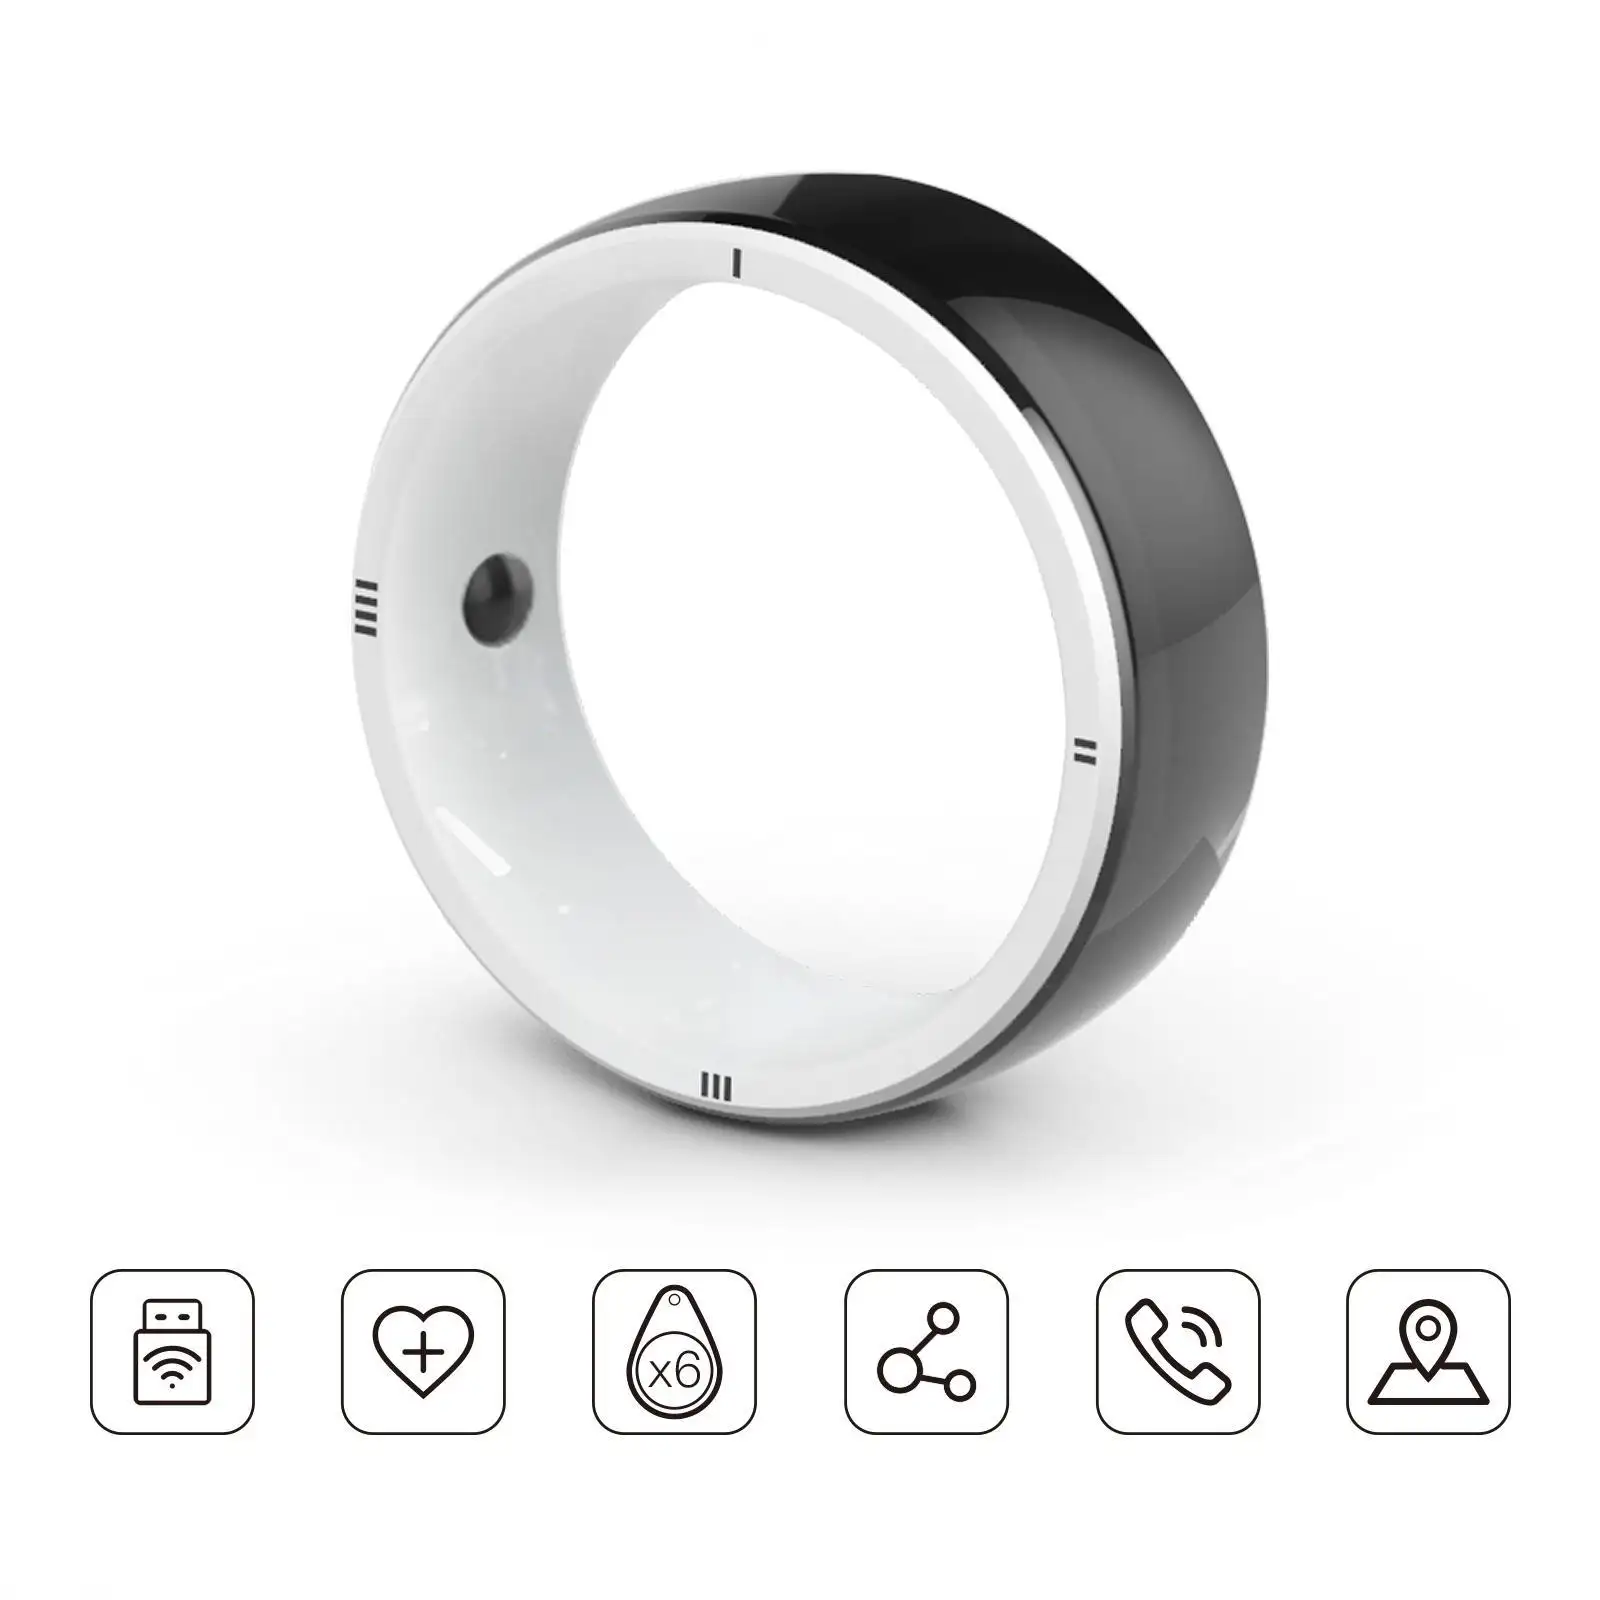 JAKCOM R5 Smart Ring New Smart Ring Nice than bike mobile stand price android d6 case usb c hub to best affordable 100w